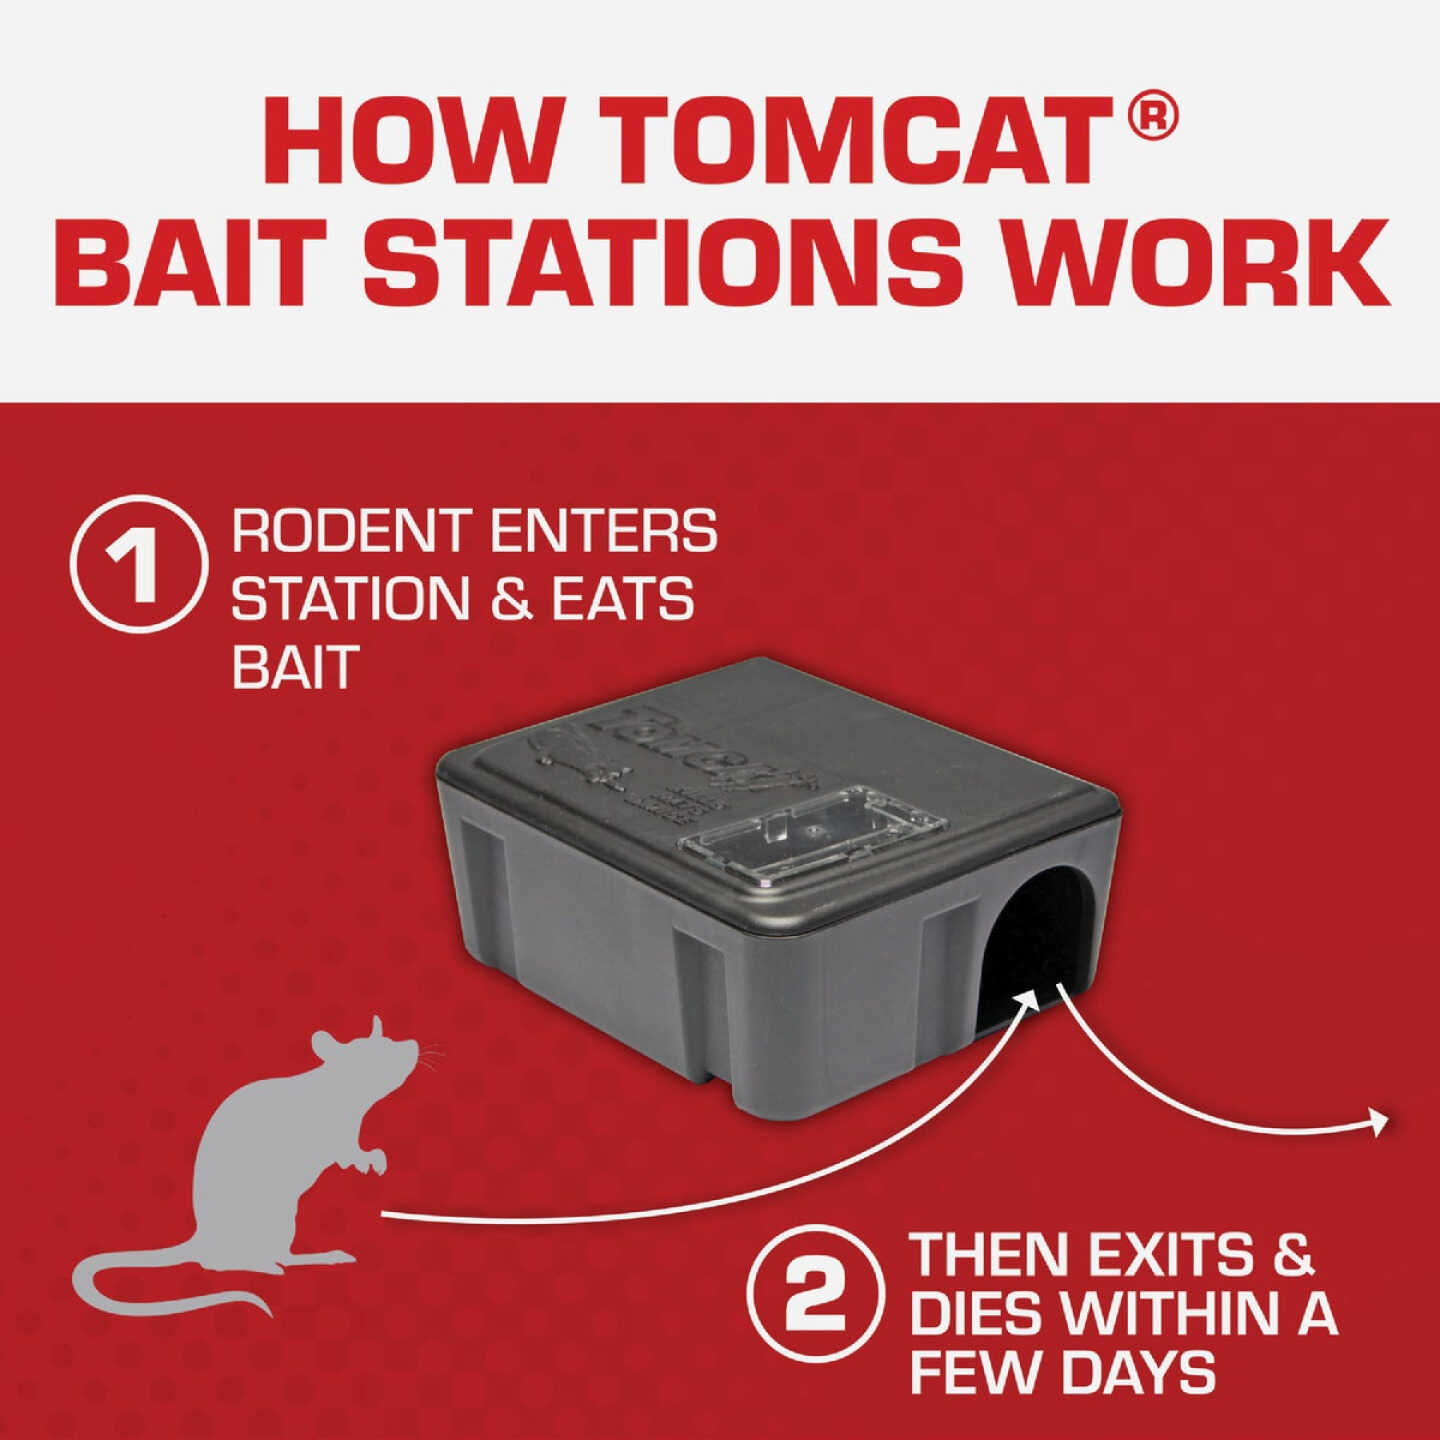  Tomcat Kill & Contain Mouse Trap, Never See a Dead